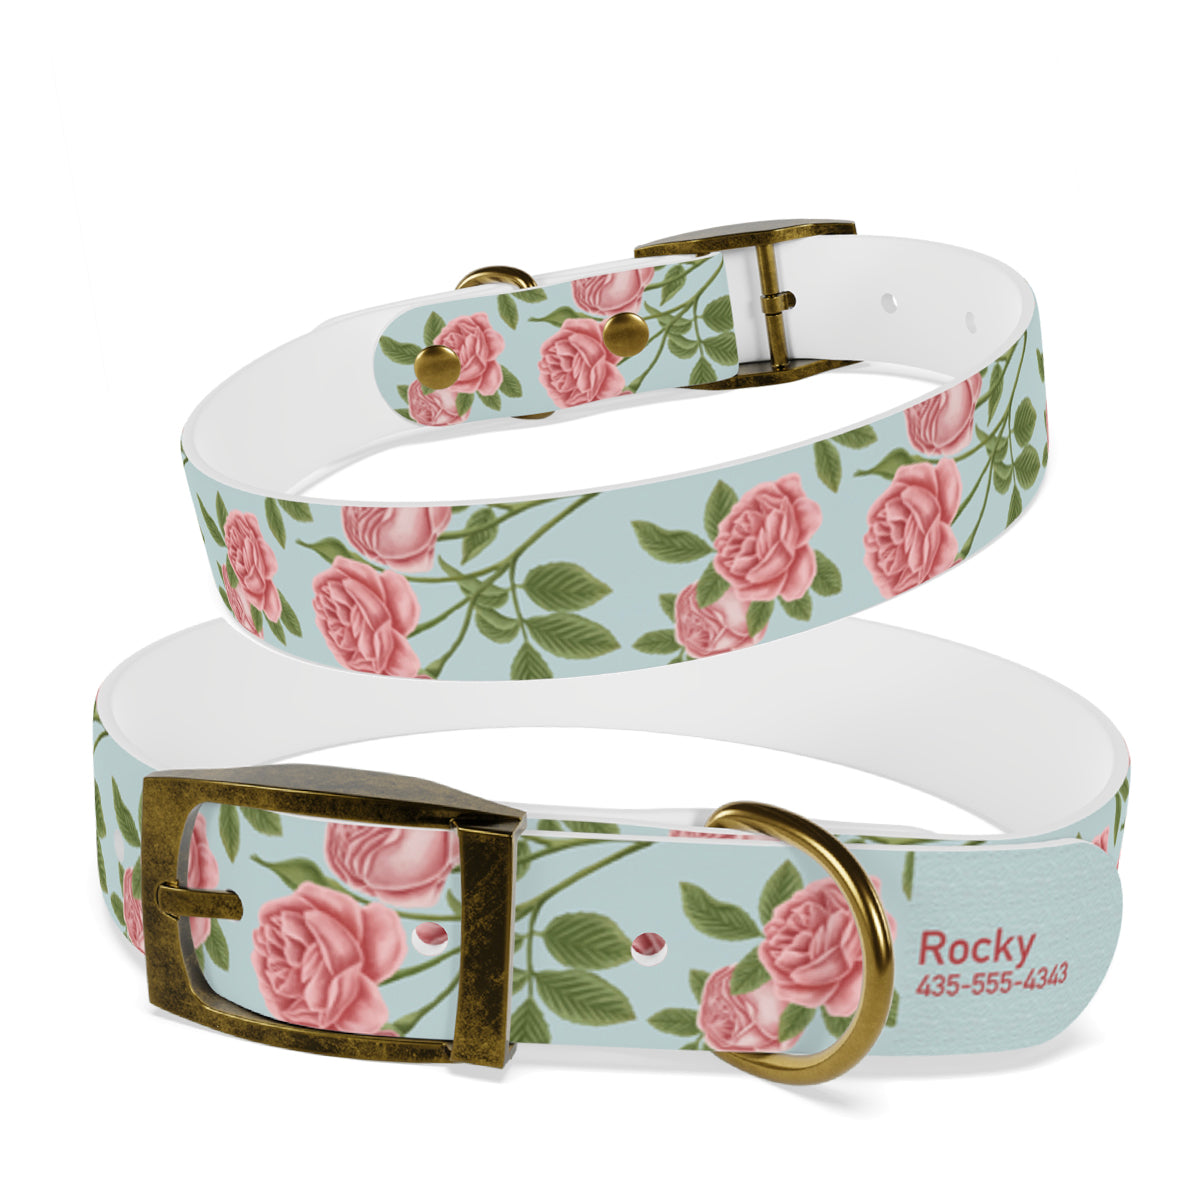 Personalized Roses Dog Collar | Antimicrobial, Waterproof & Odor Resistant